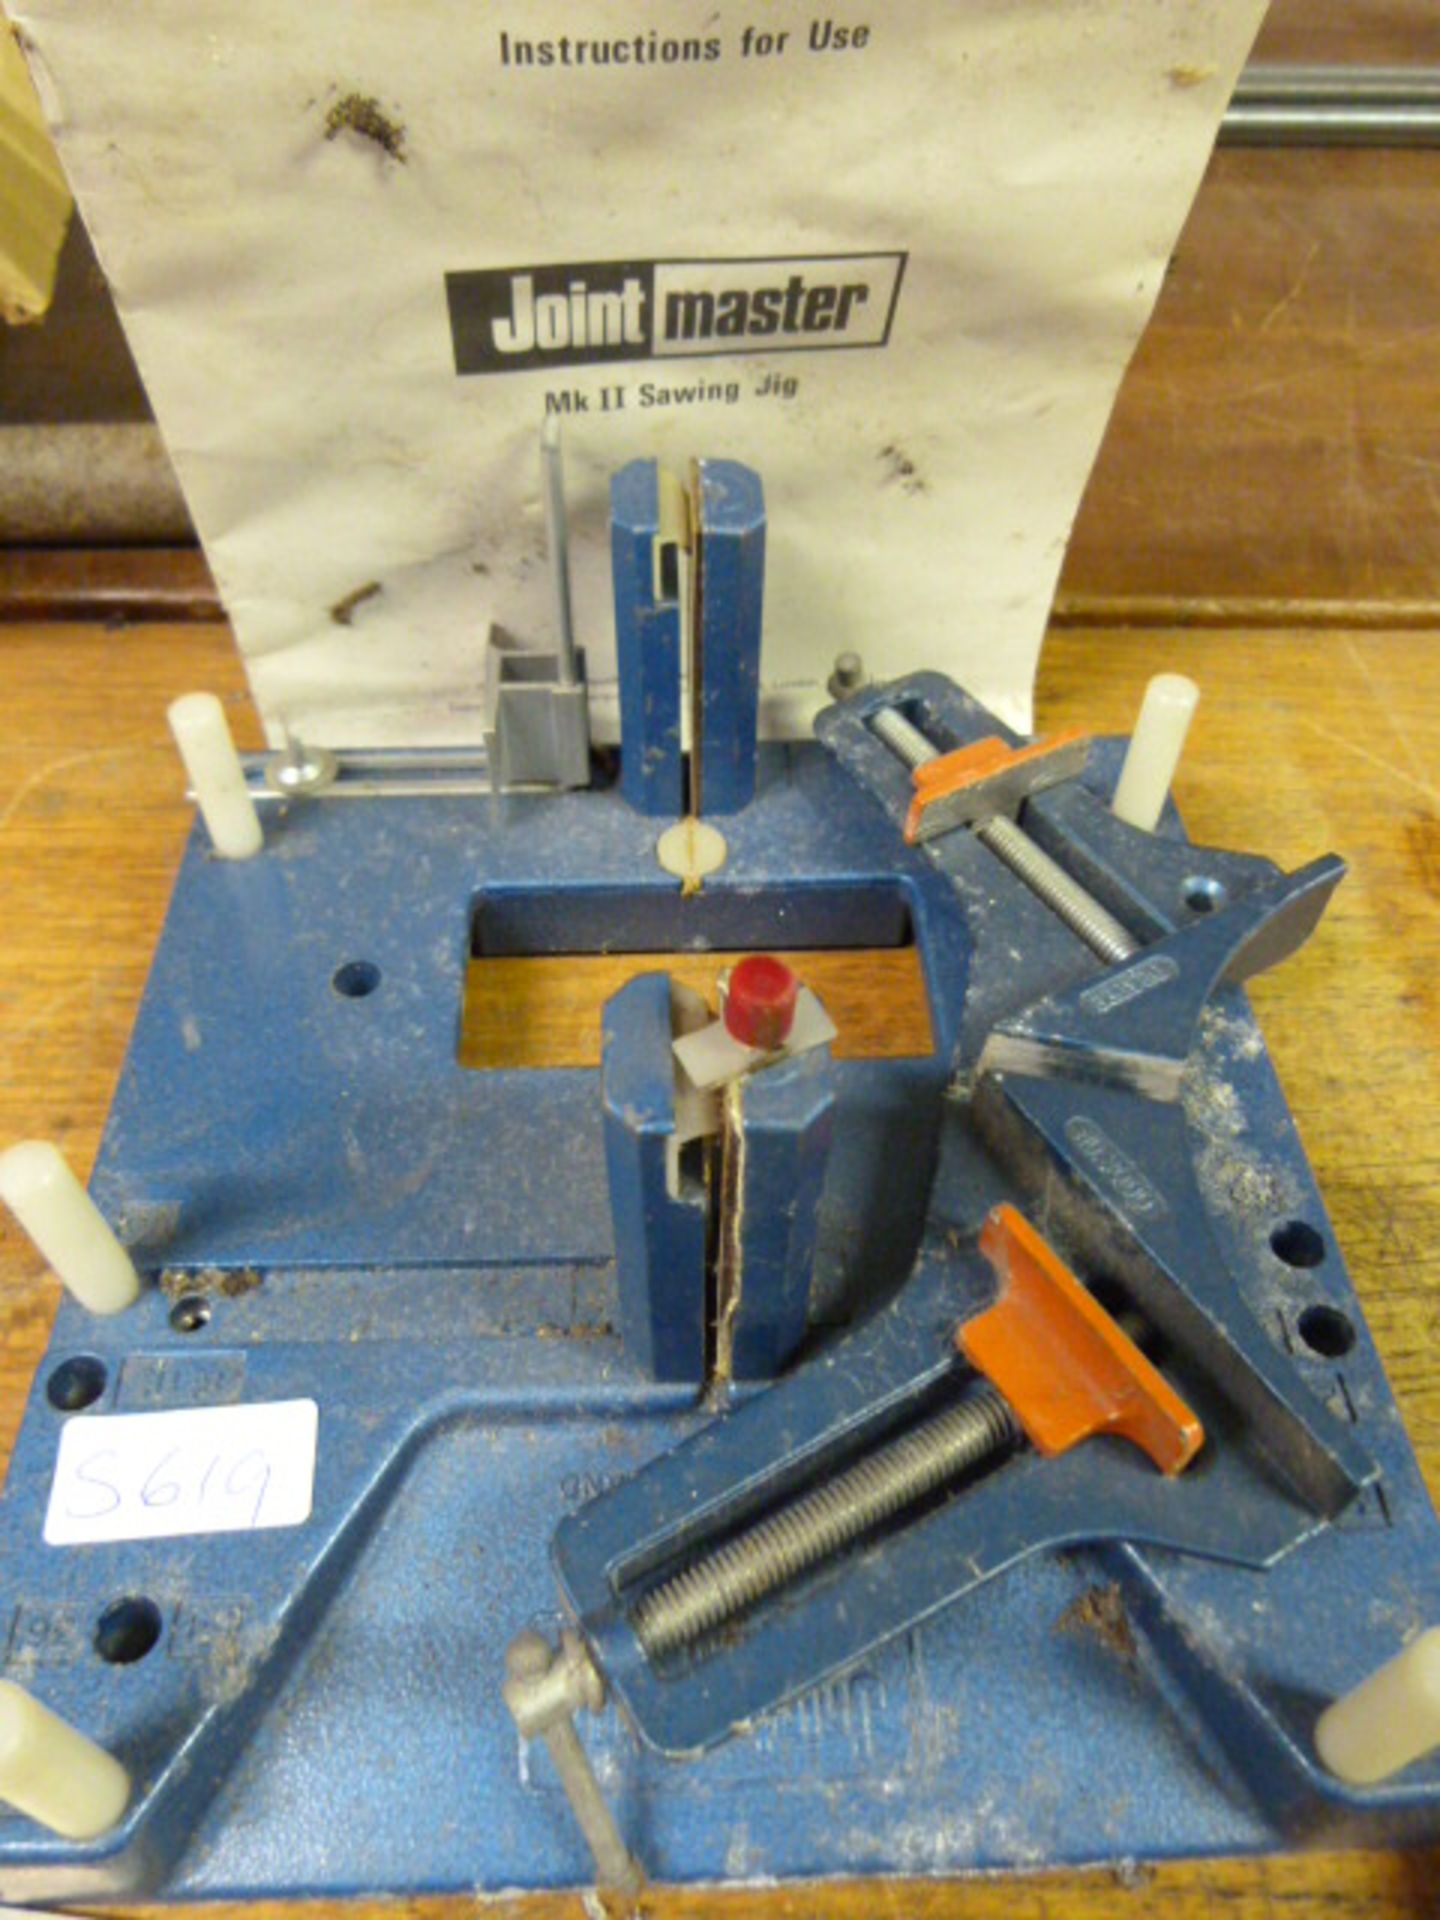 Joint Master Mk II Sawing Jig